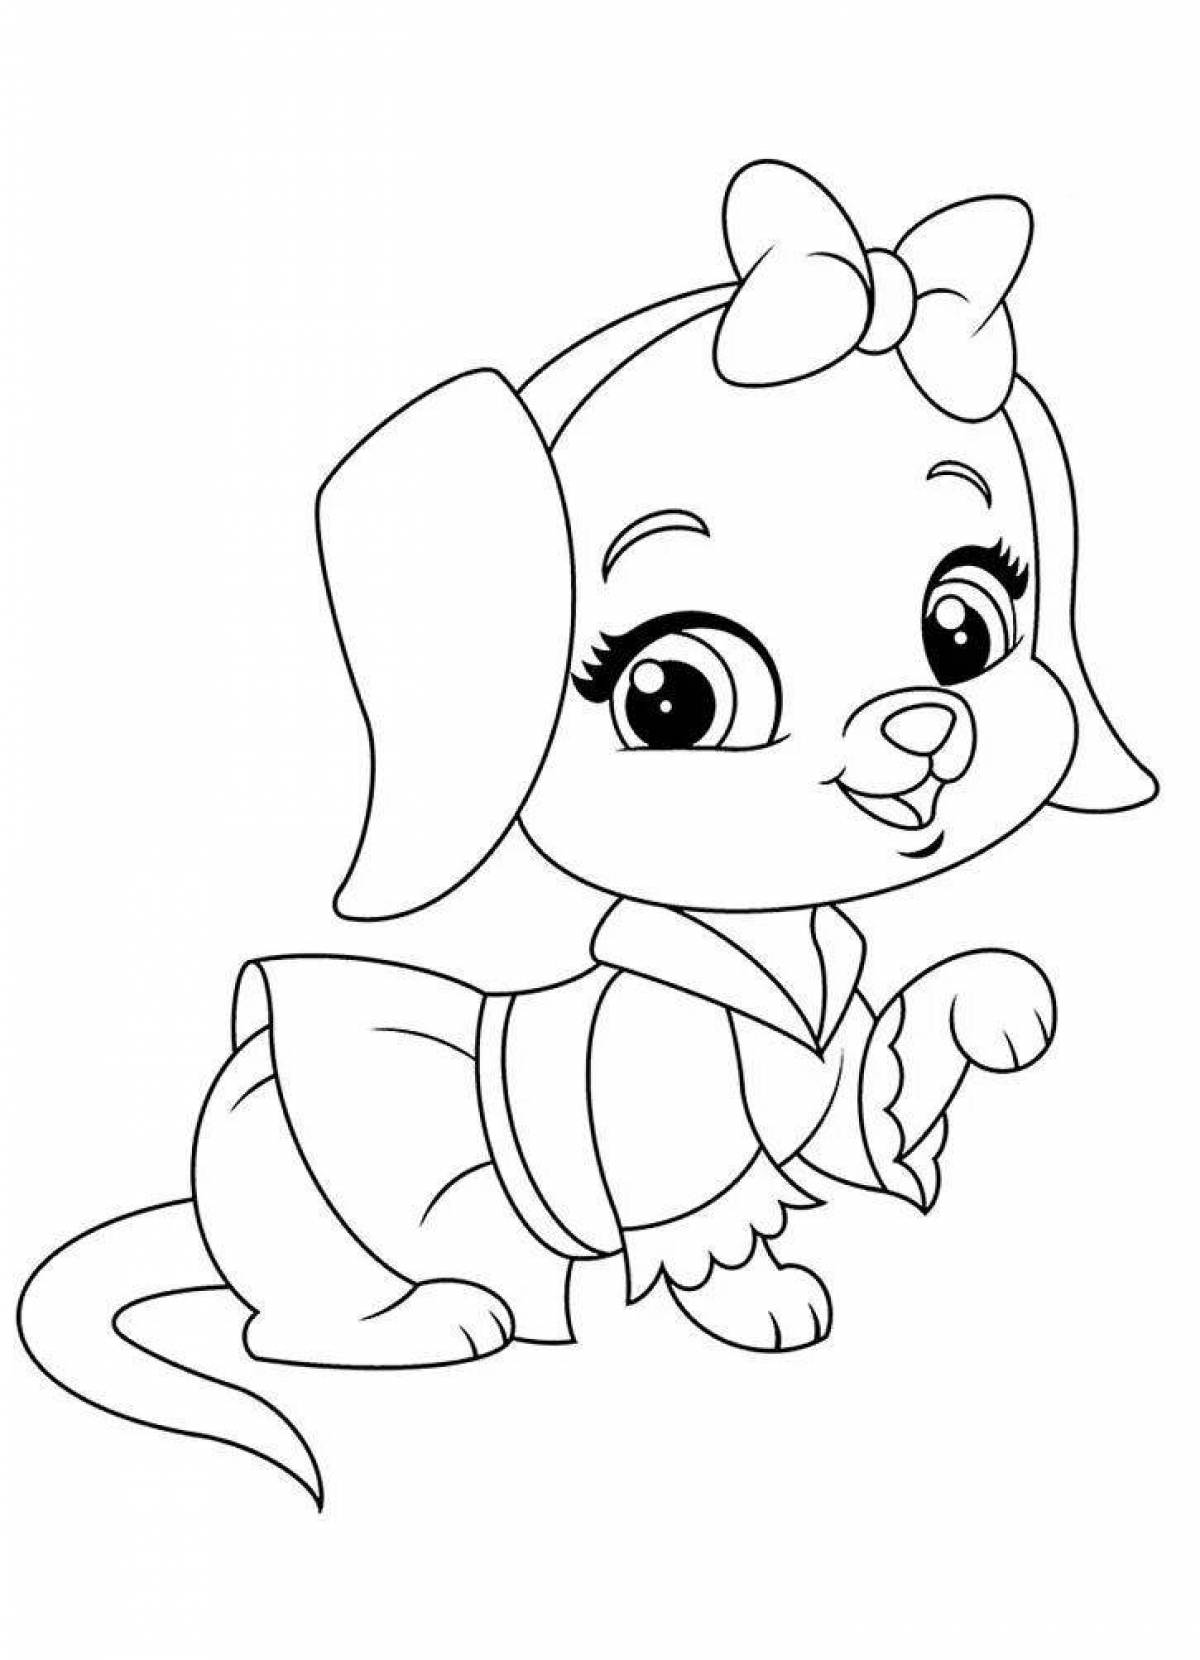 Coloring page dazzling chichilav